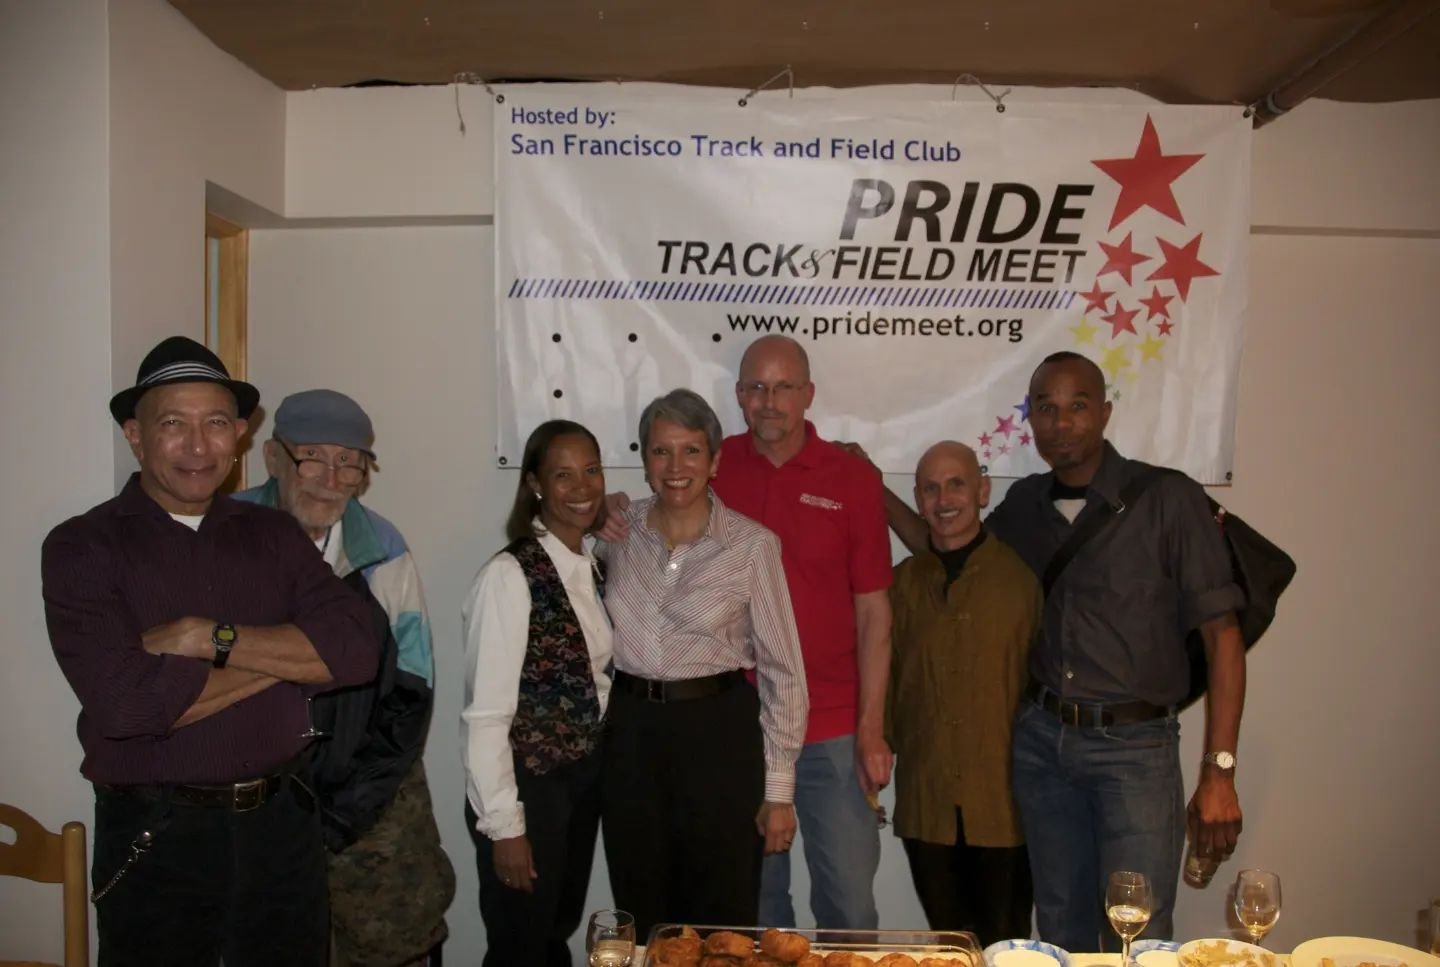 This year marks the 40th Anniversary for the San Francisco Track and Field Club @sftrackandfield. The club was formed immediately after the 1st Gay Games, hosted at our very own Kezar Stadium in 1982. Those members wanted to keep the spirit of the Ga